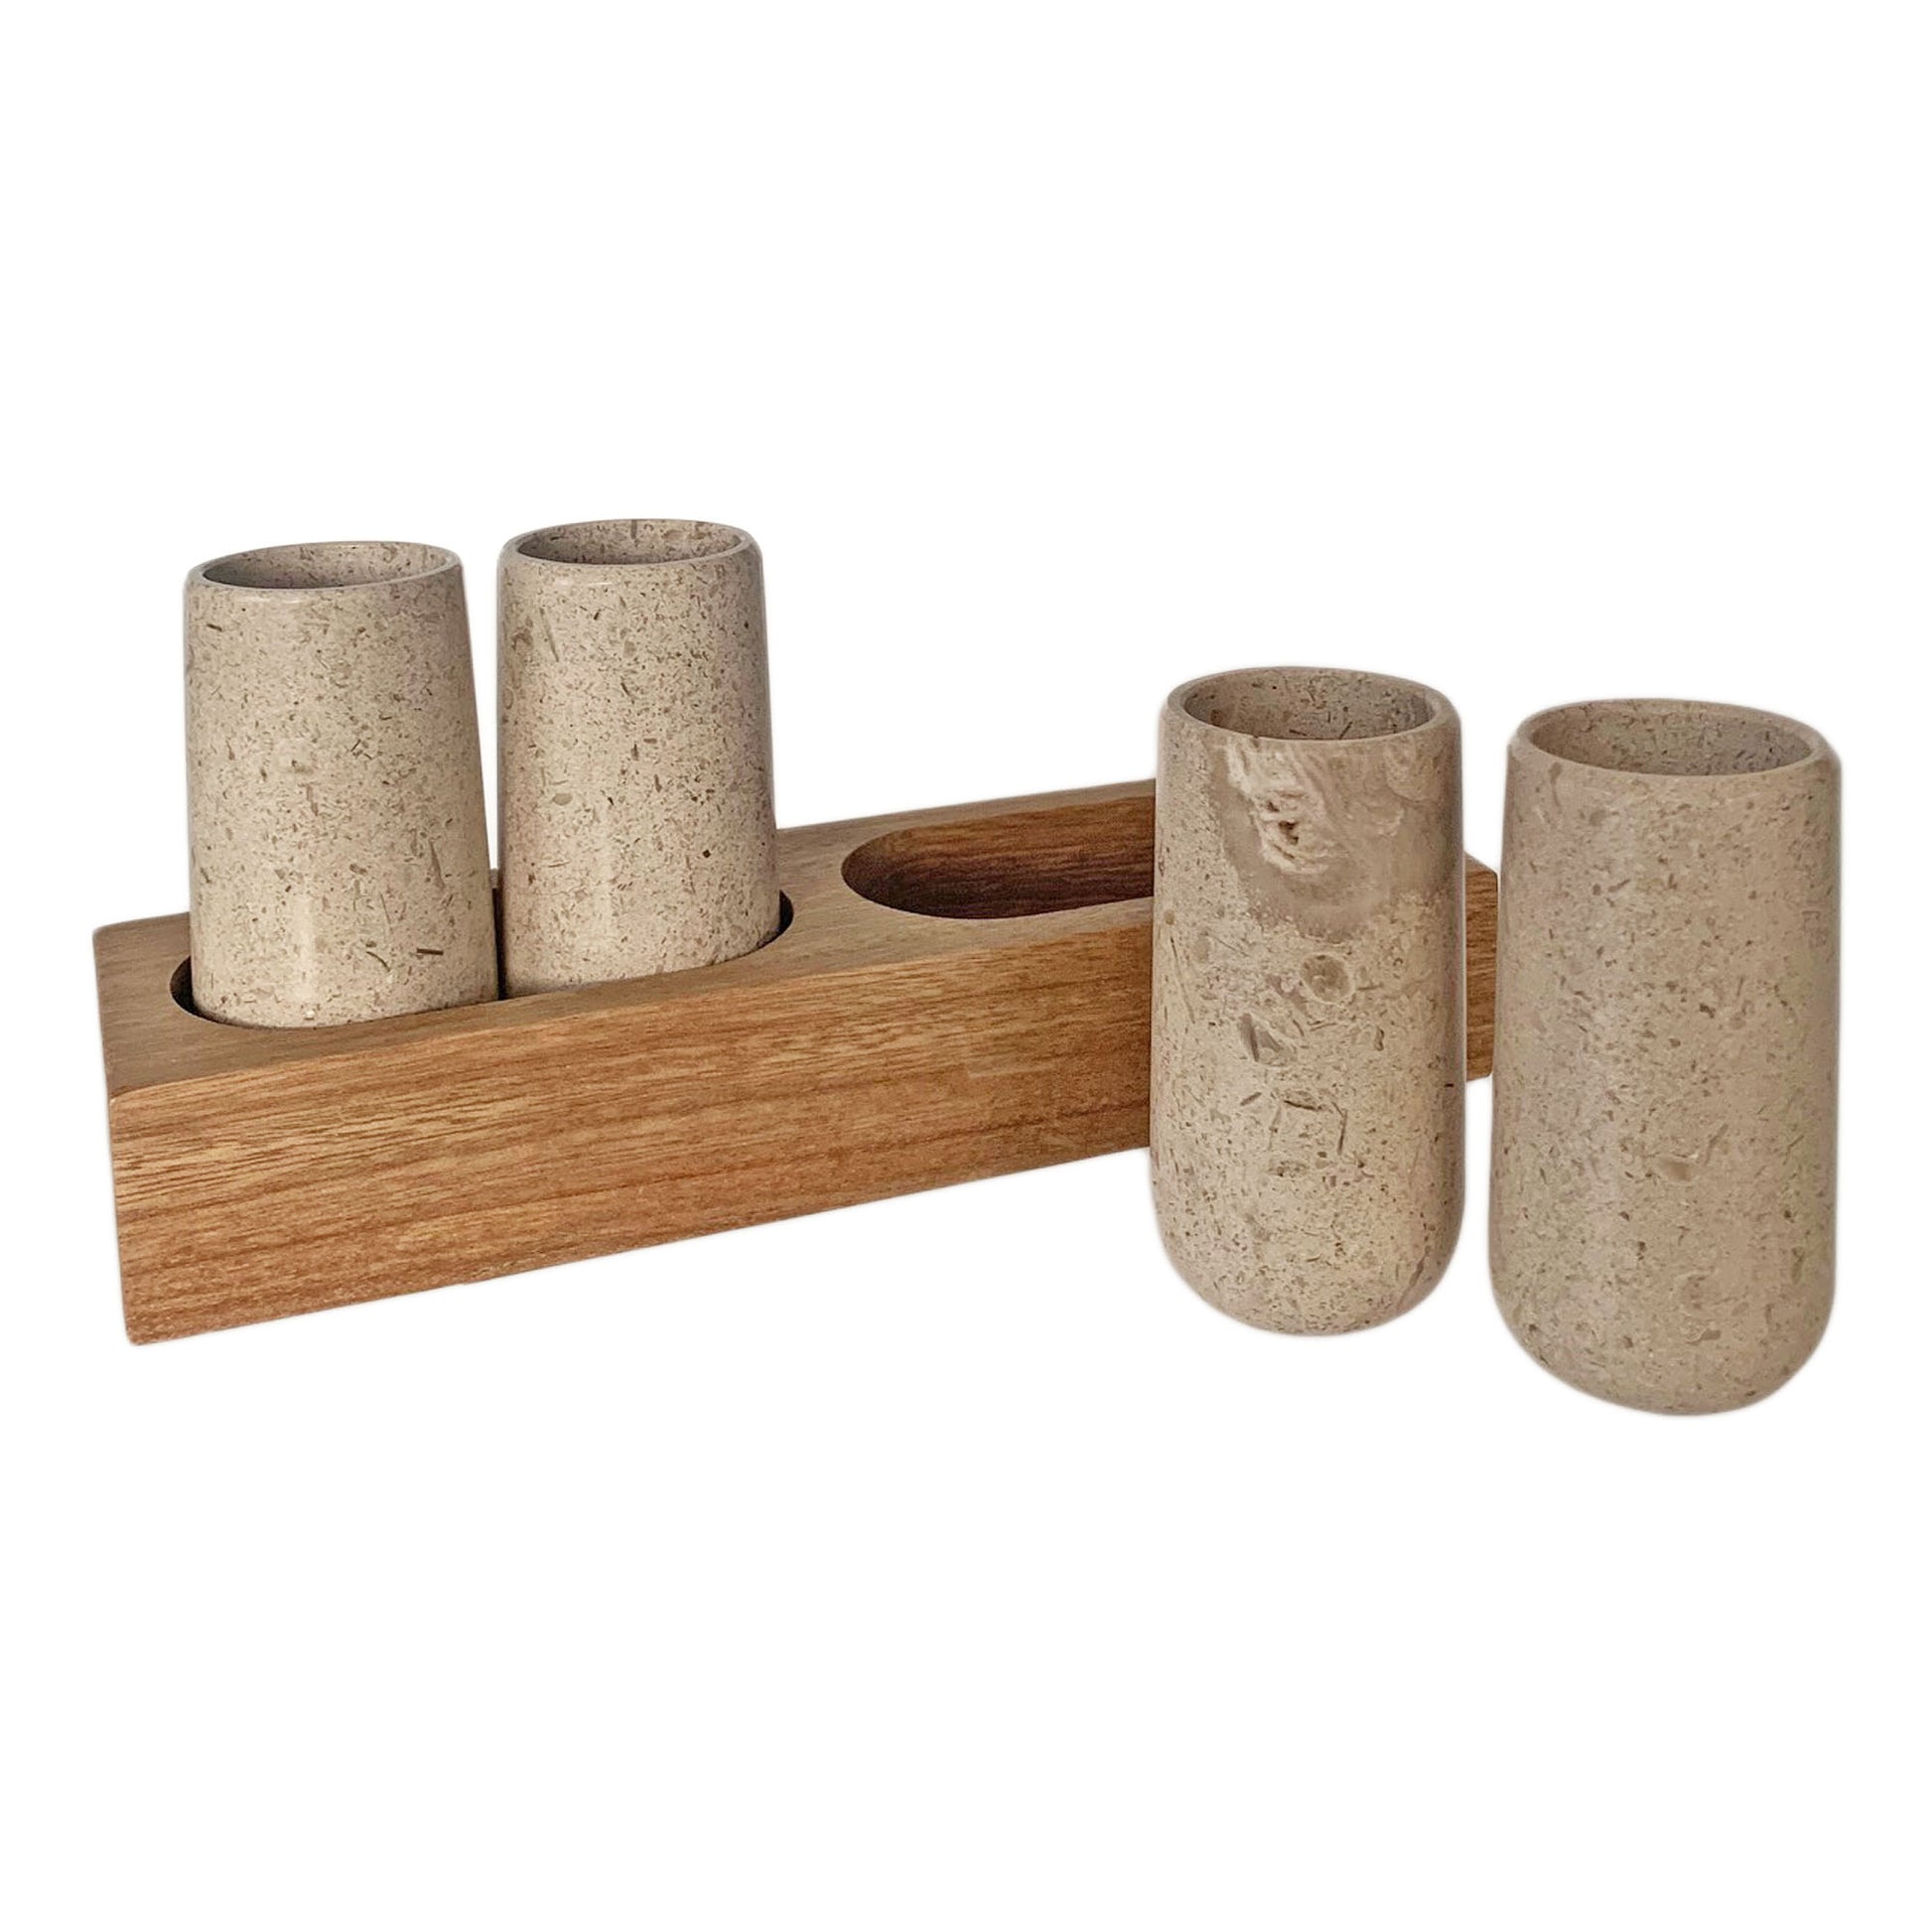 Tequila Shot Glasses Hand Carved out of Marble with Wooden Base